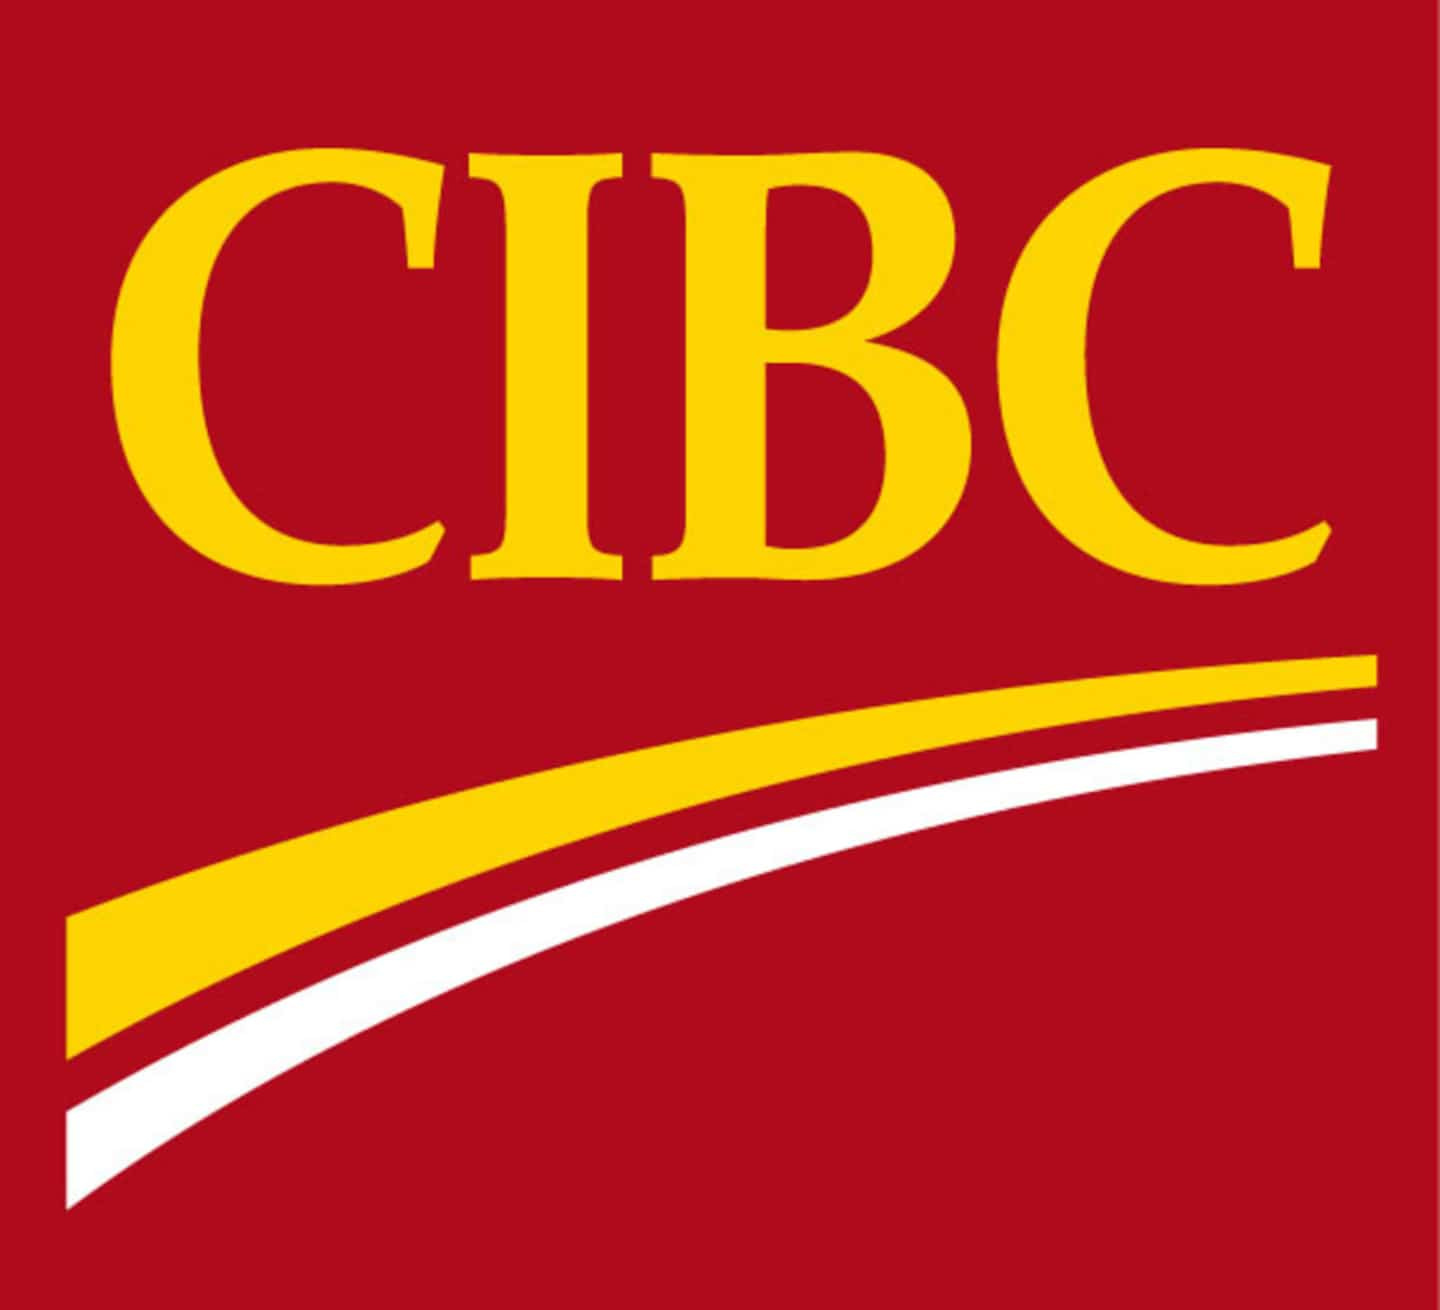 Unpaid overtime: CIBC agrees to pay $153 million to close the lawsuit